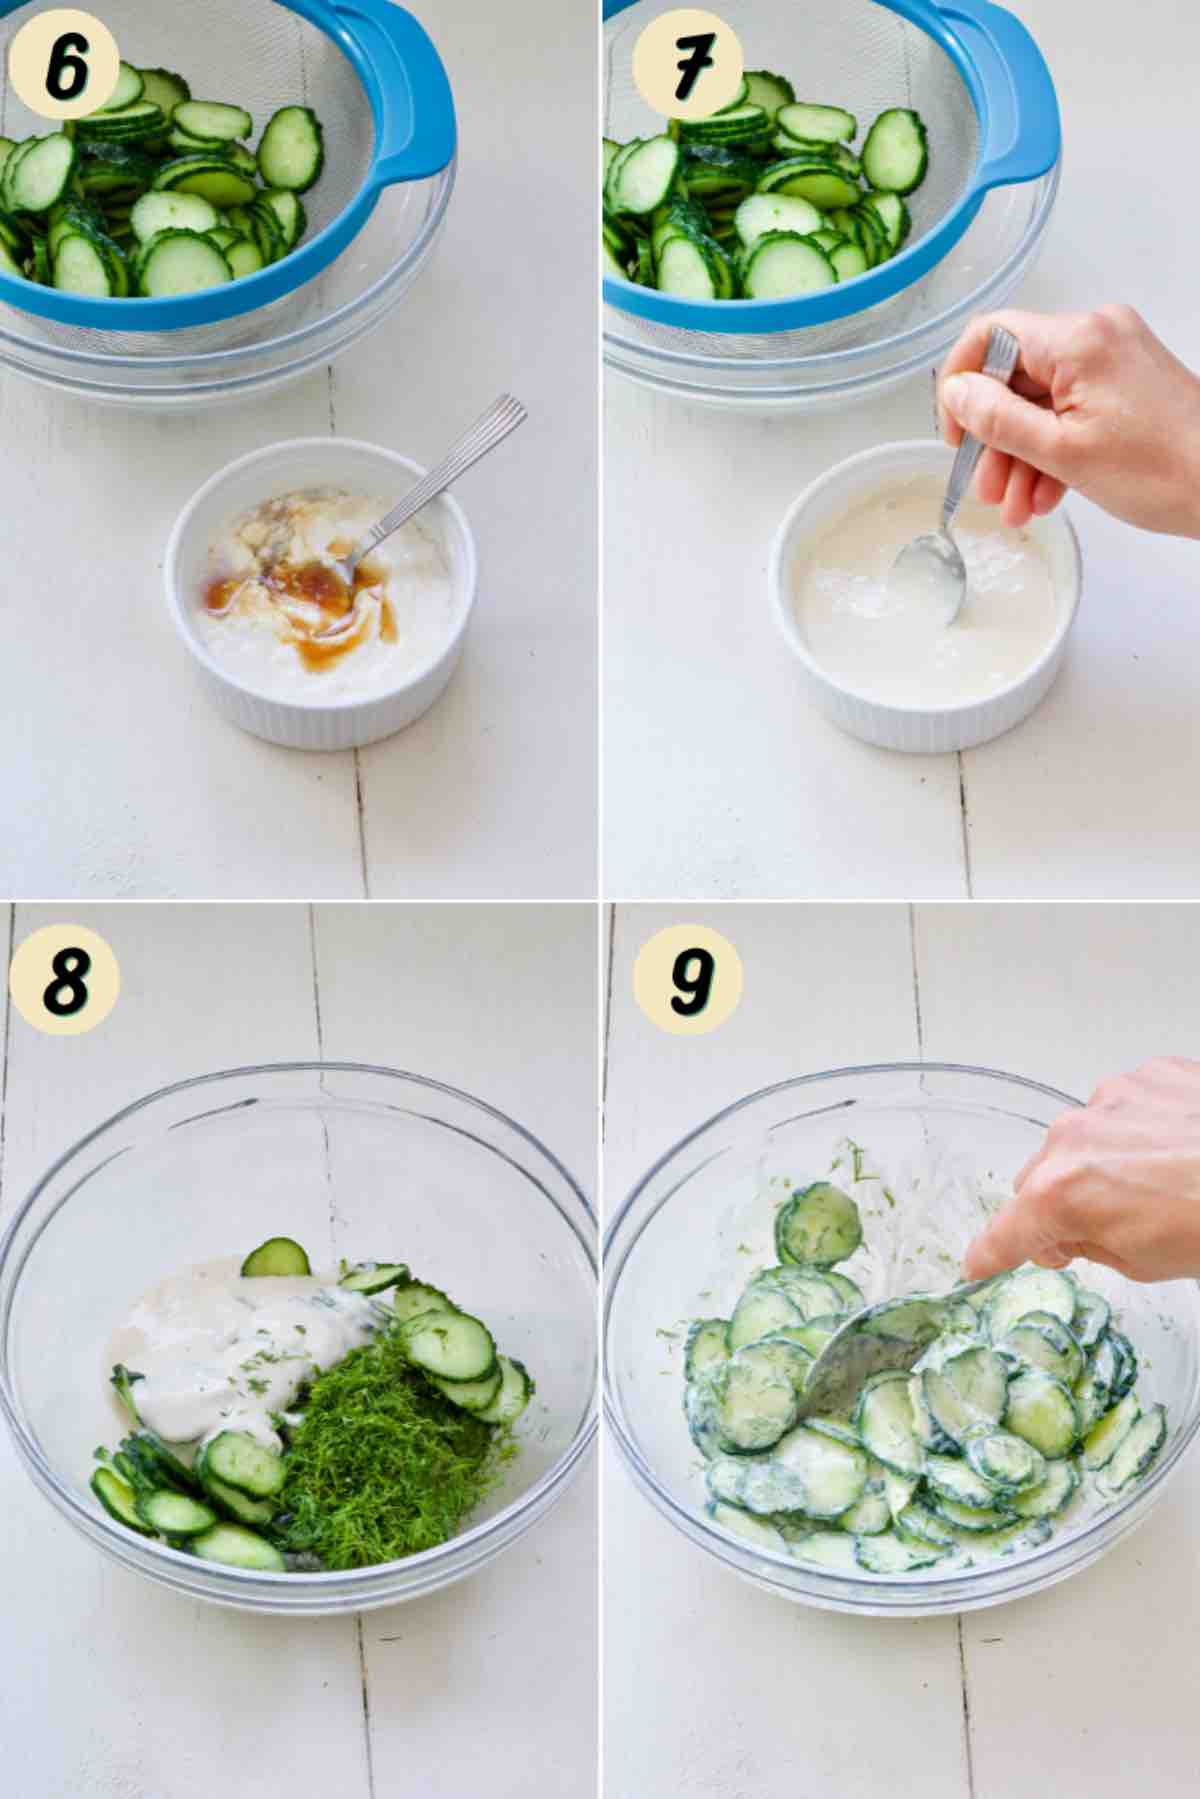 Mixing dressing and adding to cucumbers with dill.